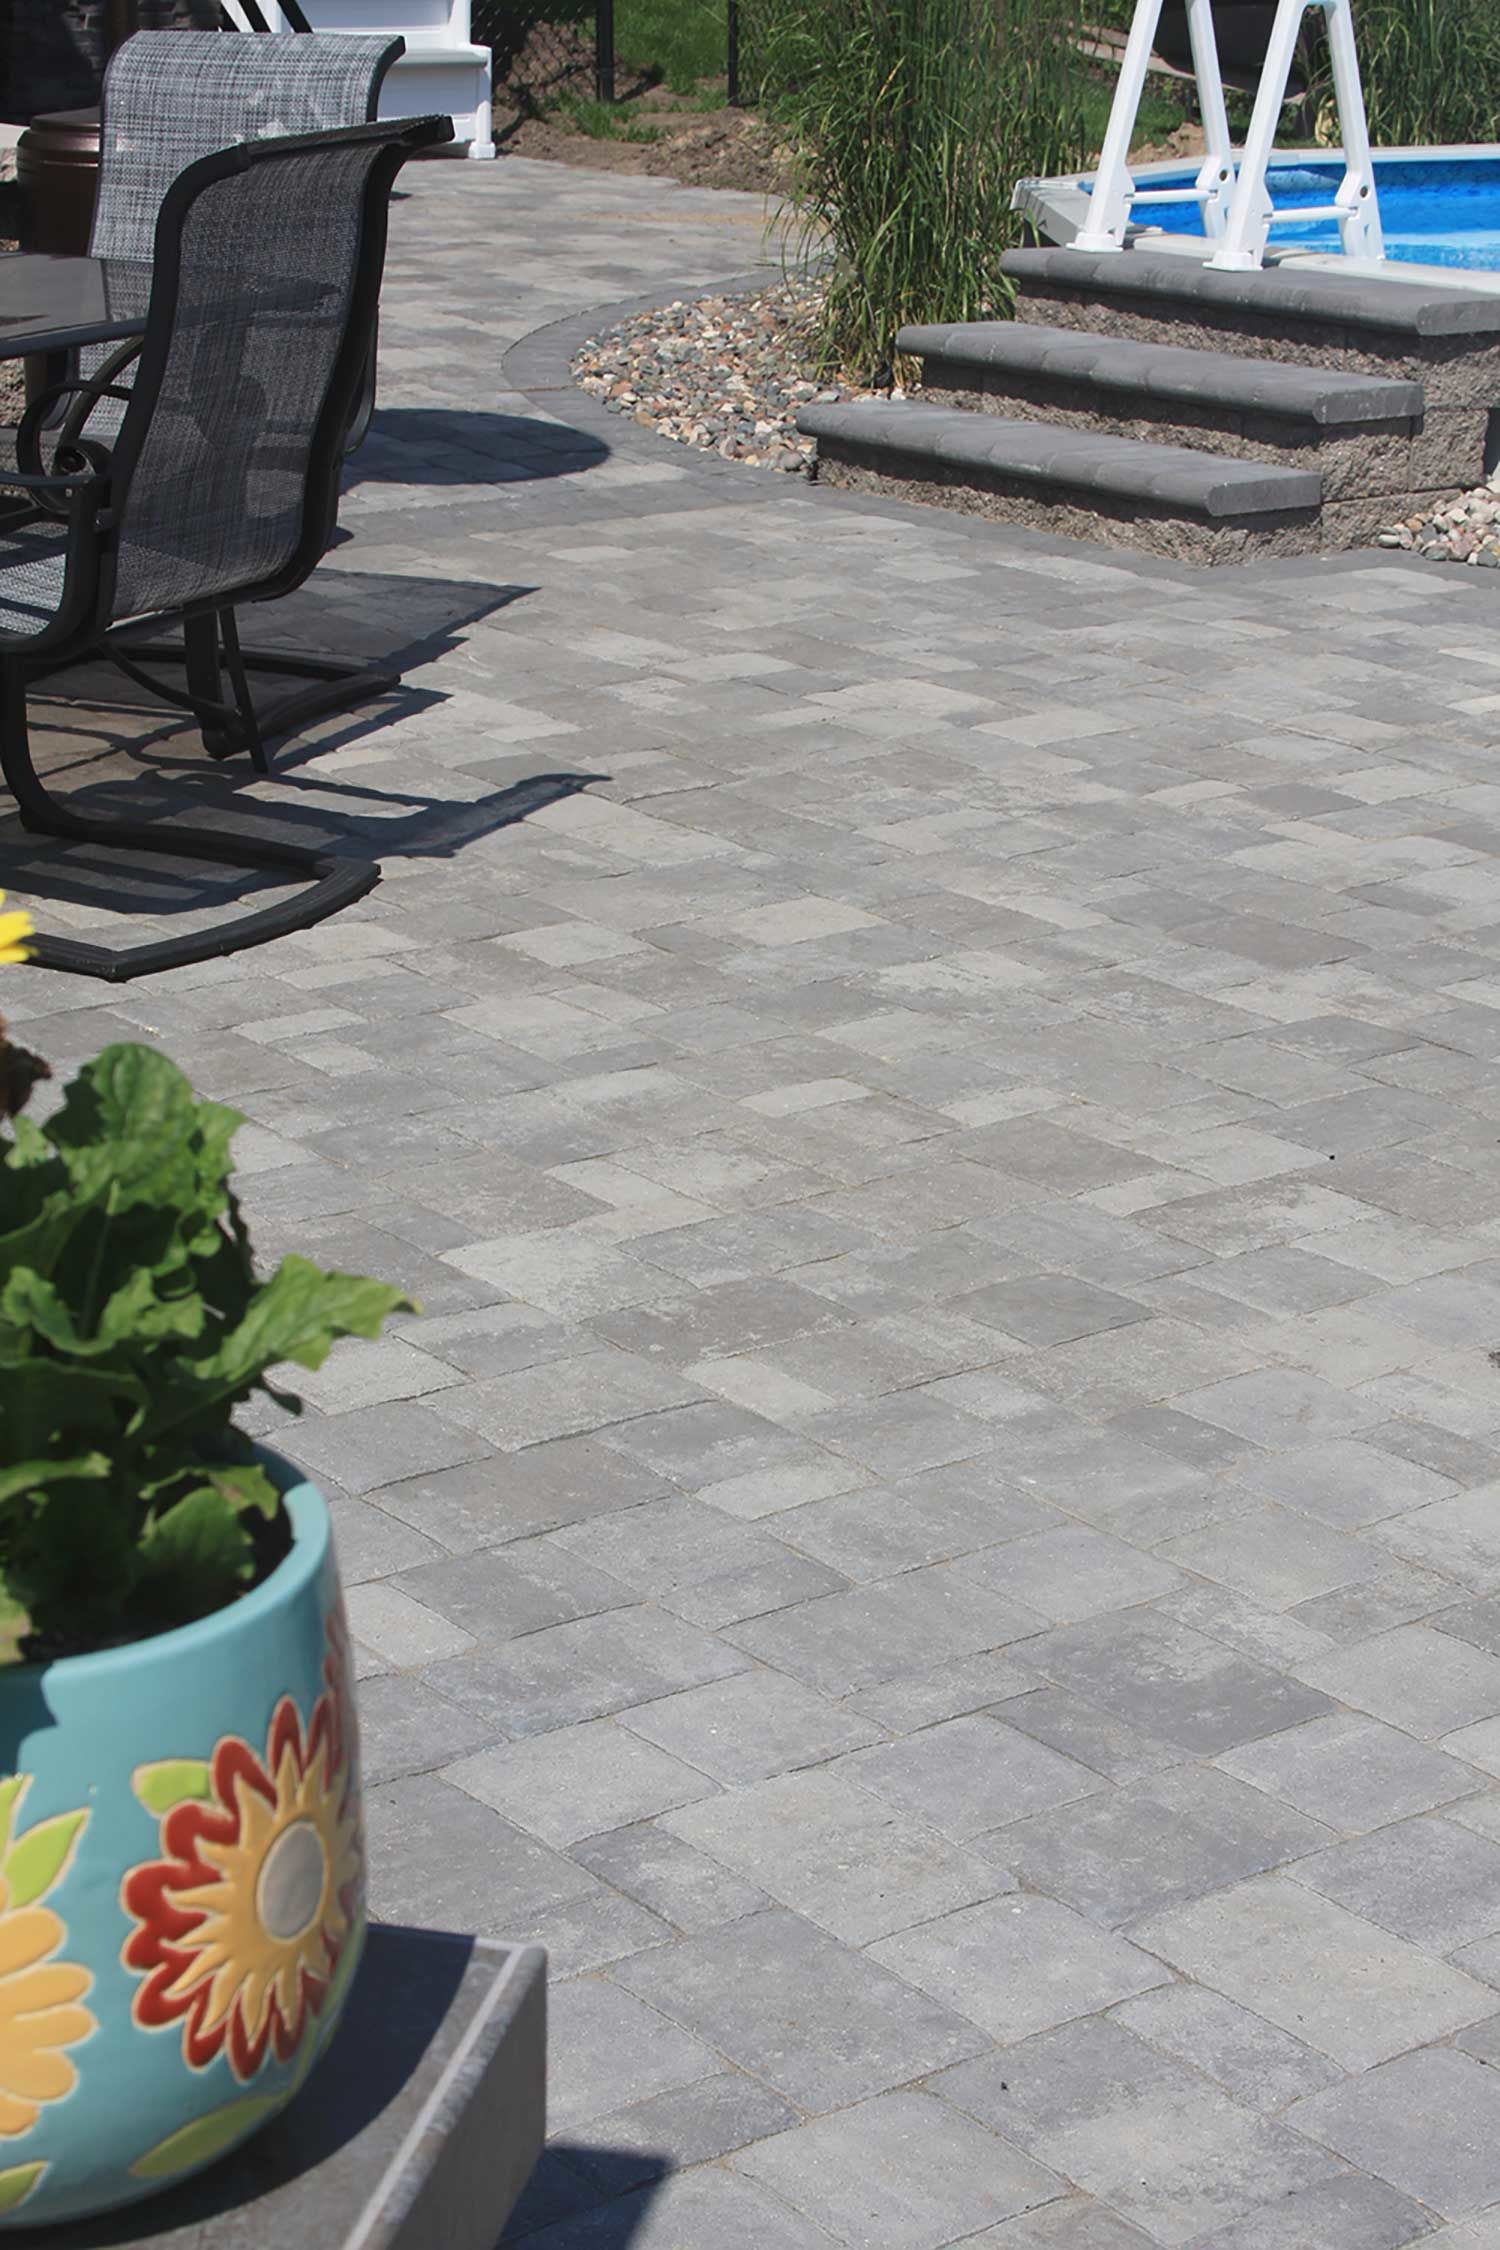 Pavers make for an attractive pool deck.